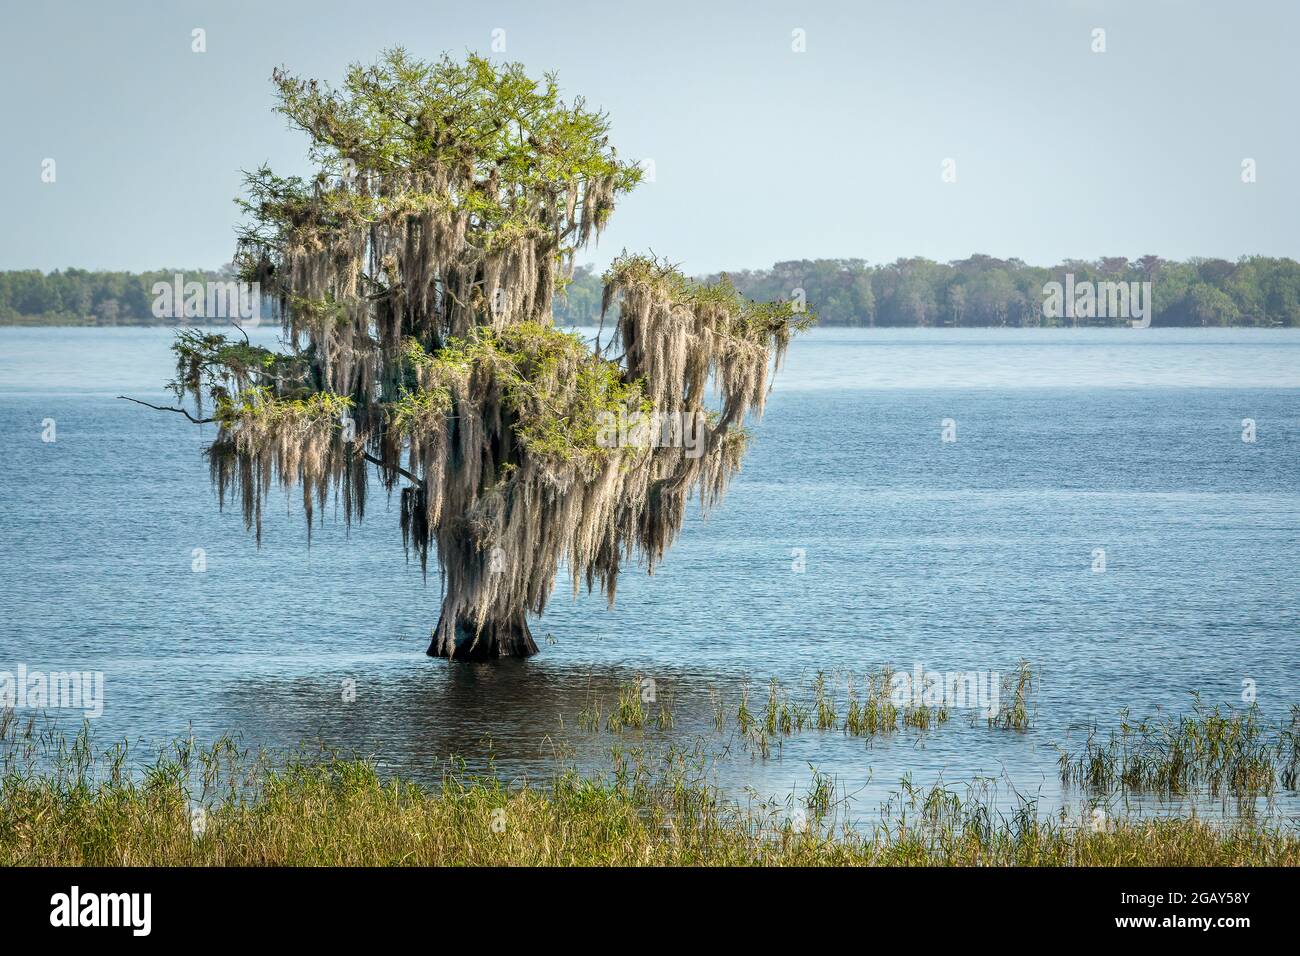 A Tree covered with Spanish moss standing alone in Blue Cypress Lake in Florida. Stock Photo